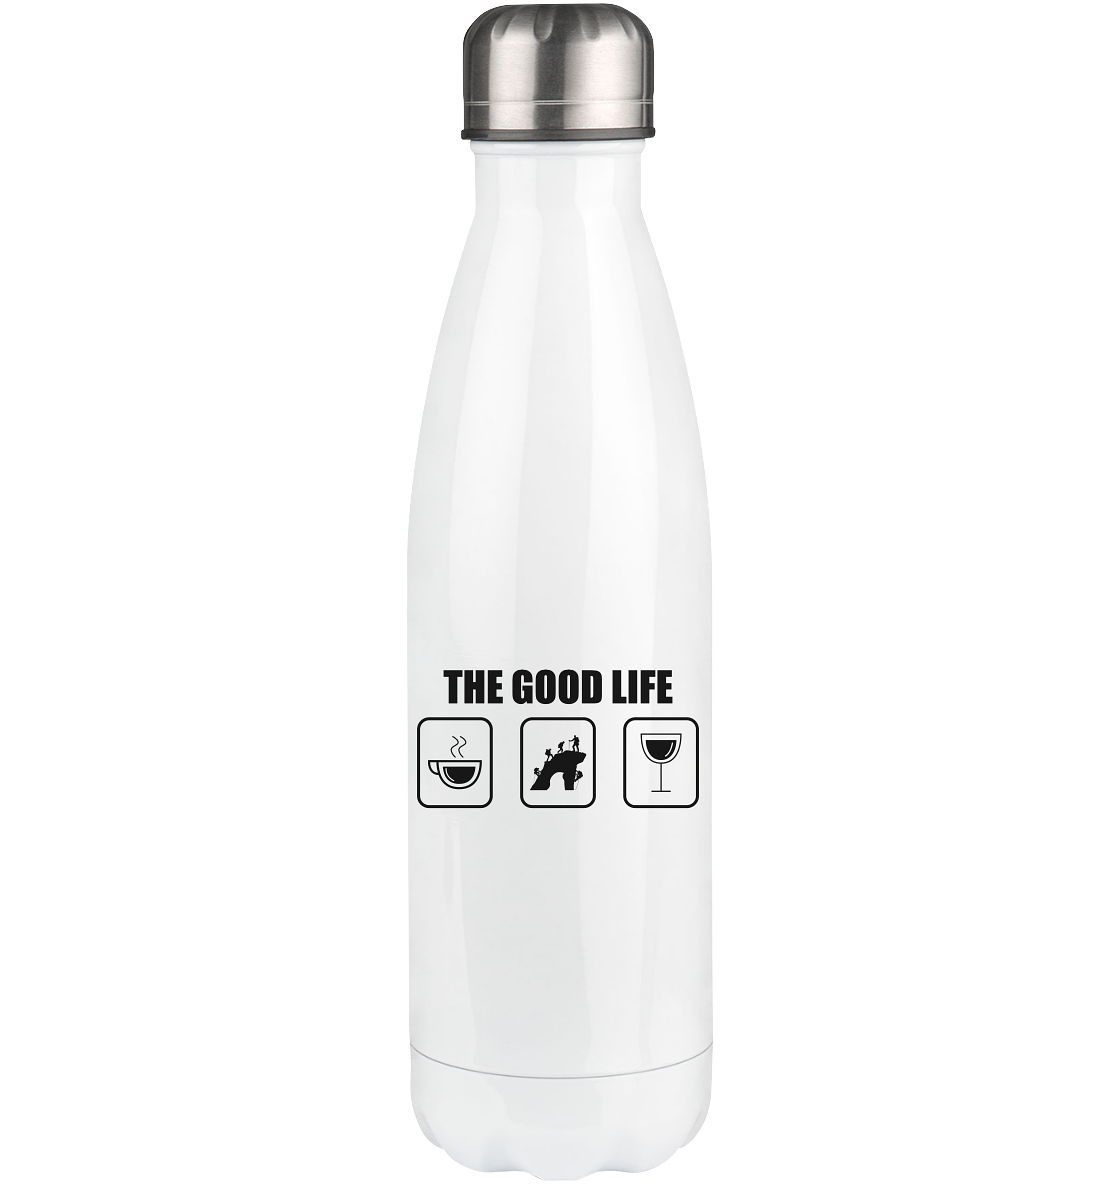 The Good Life - Edelstahl Thermosflasche klettern 500ml